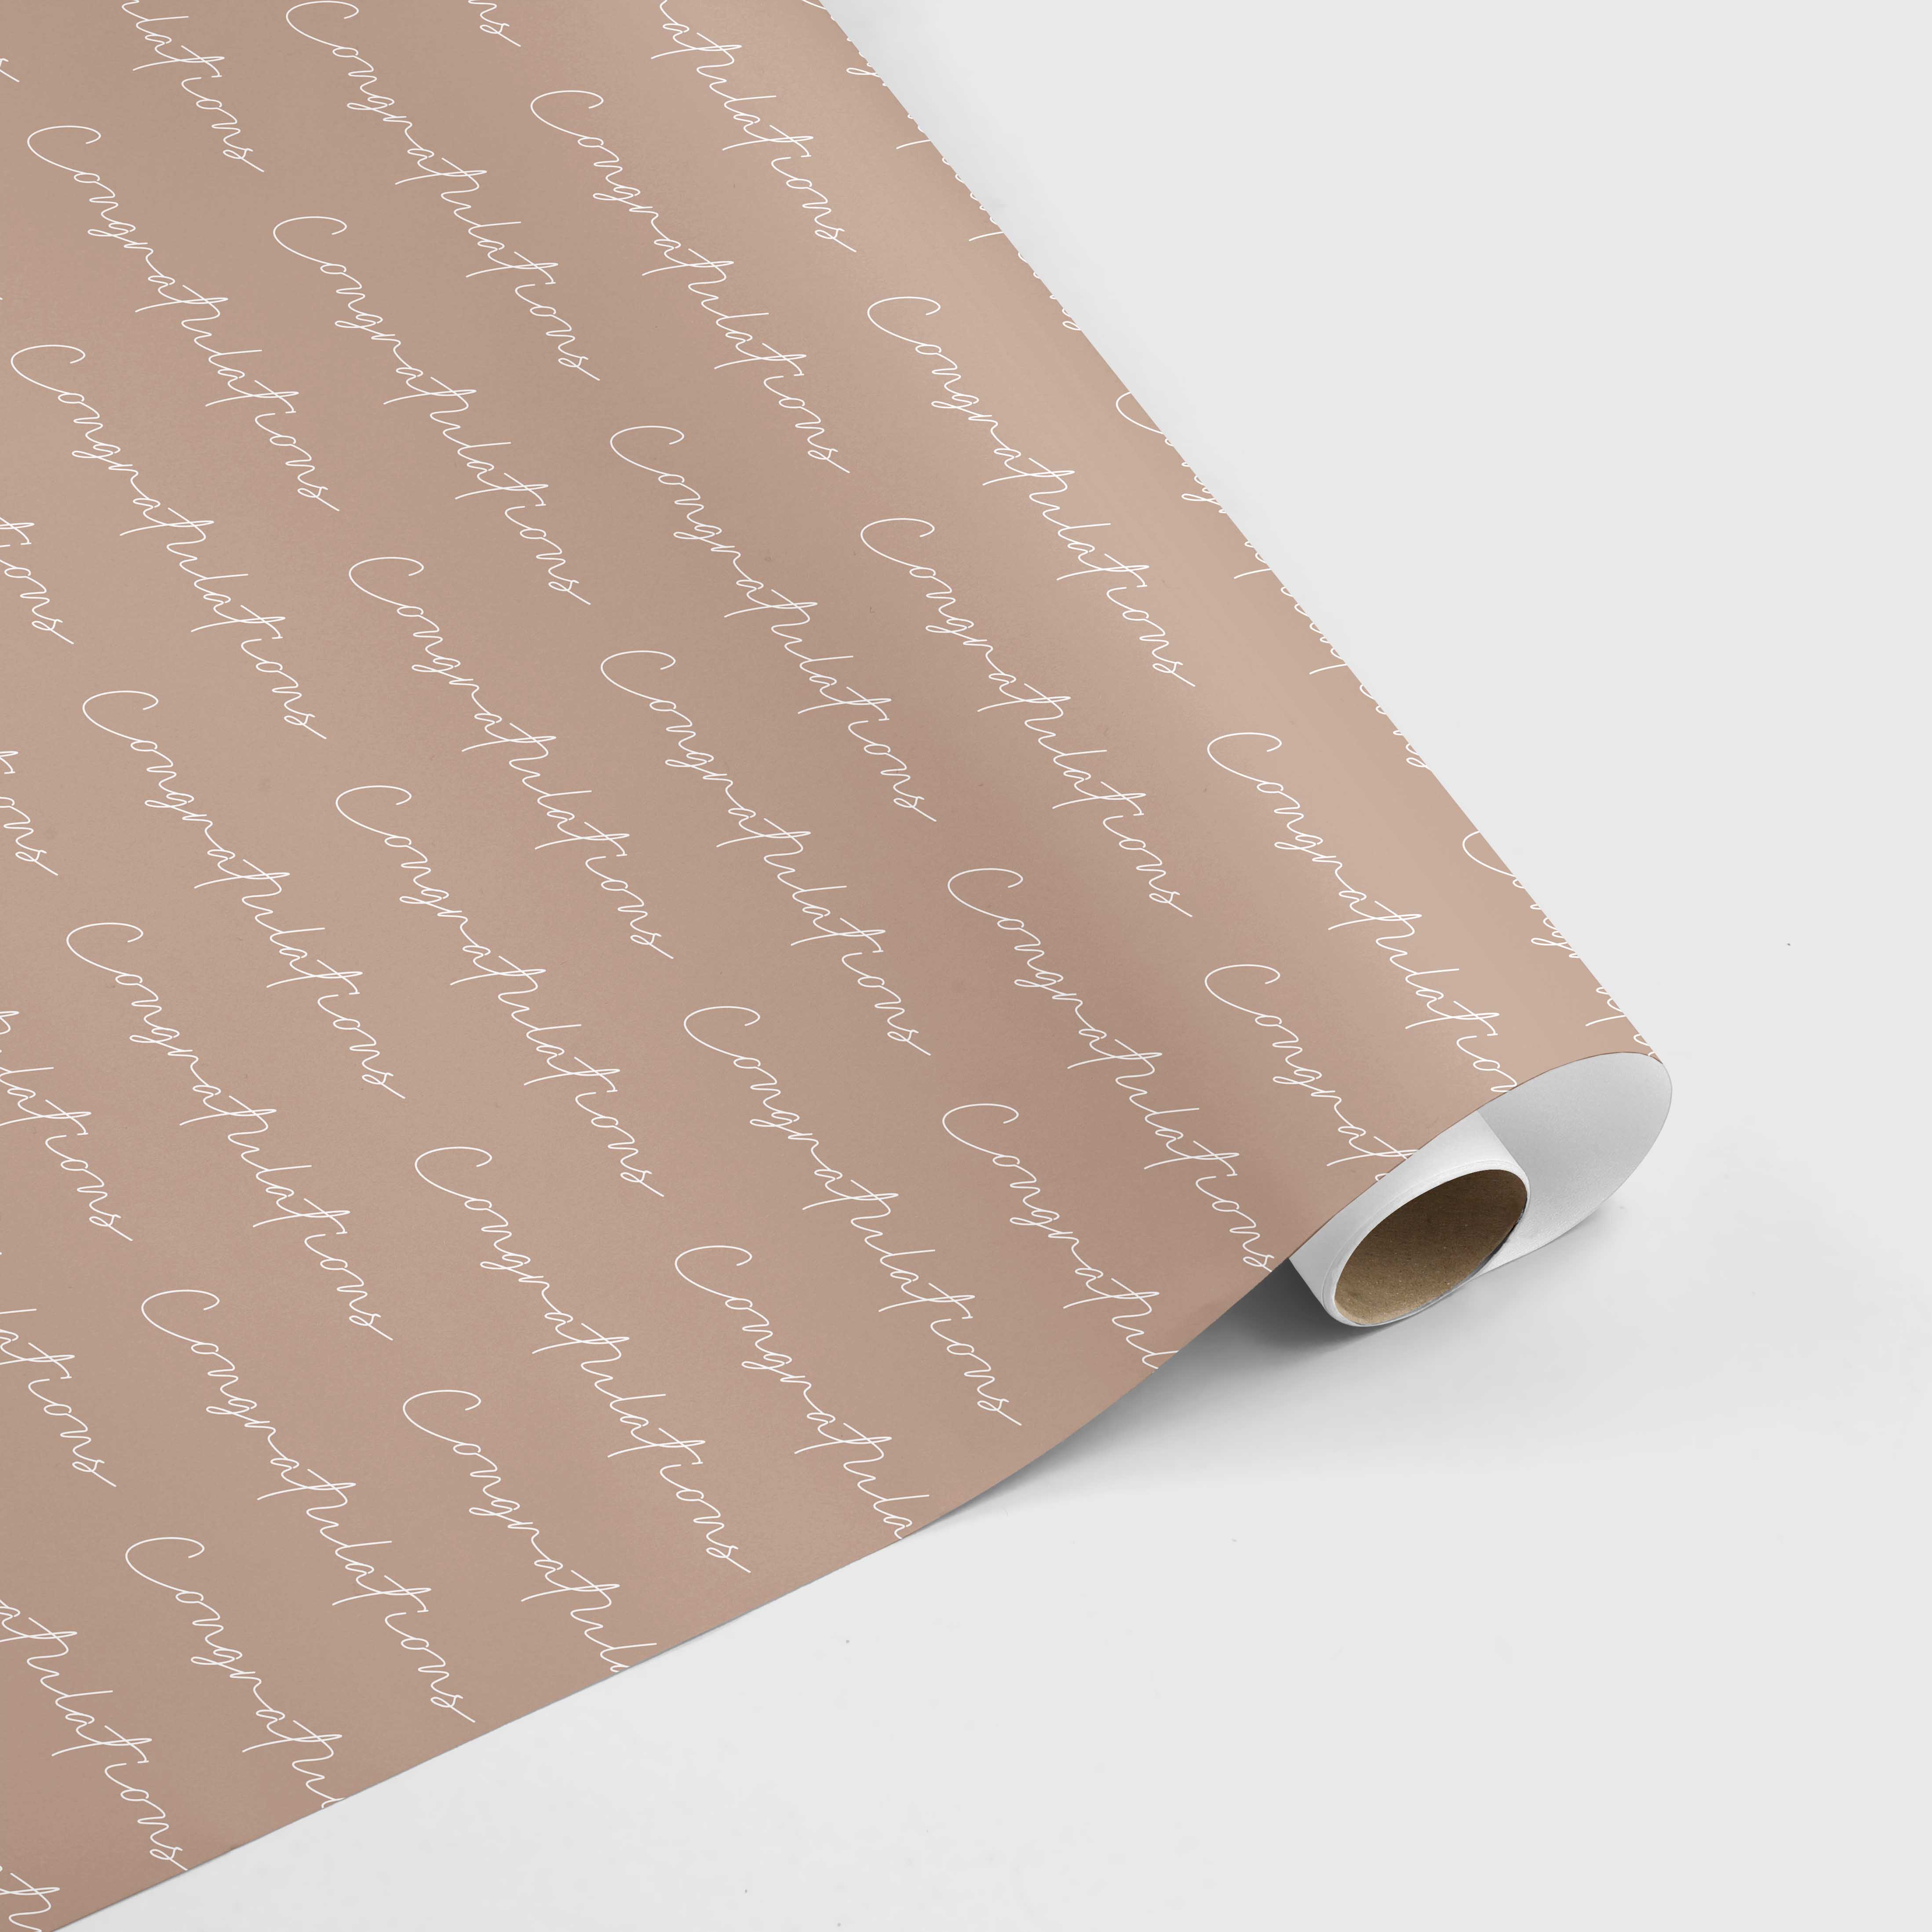 Cream congratulations wrapping sheets+note cards (set of 5)